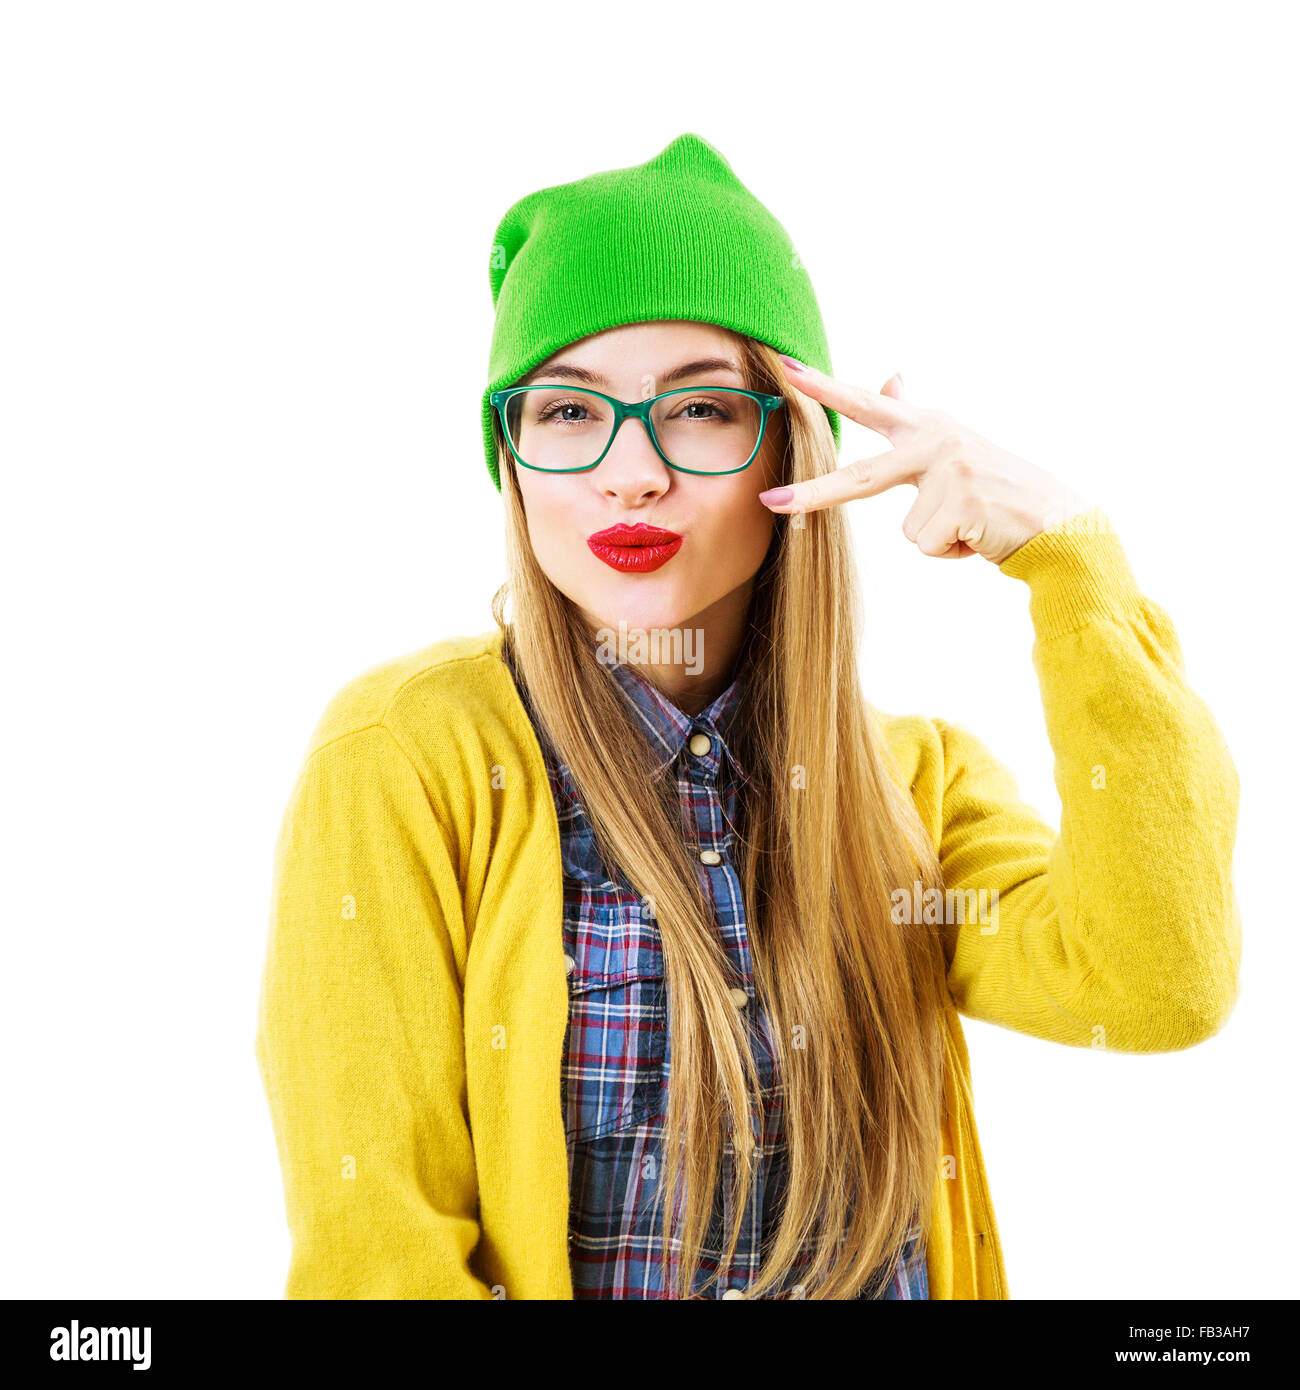 Funny Hipster Girl Going Crazy Isolated on White Stock Photo - Alamy